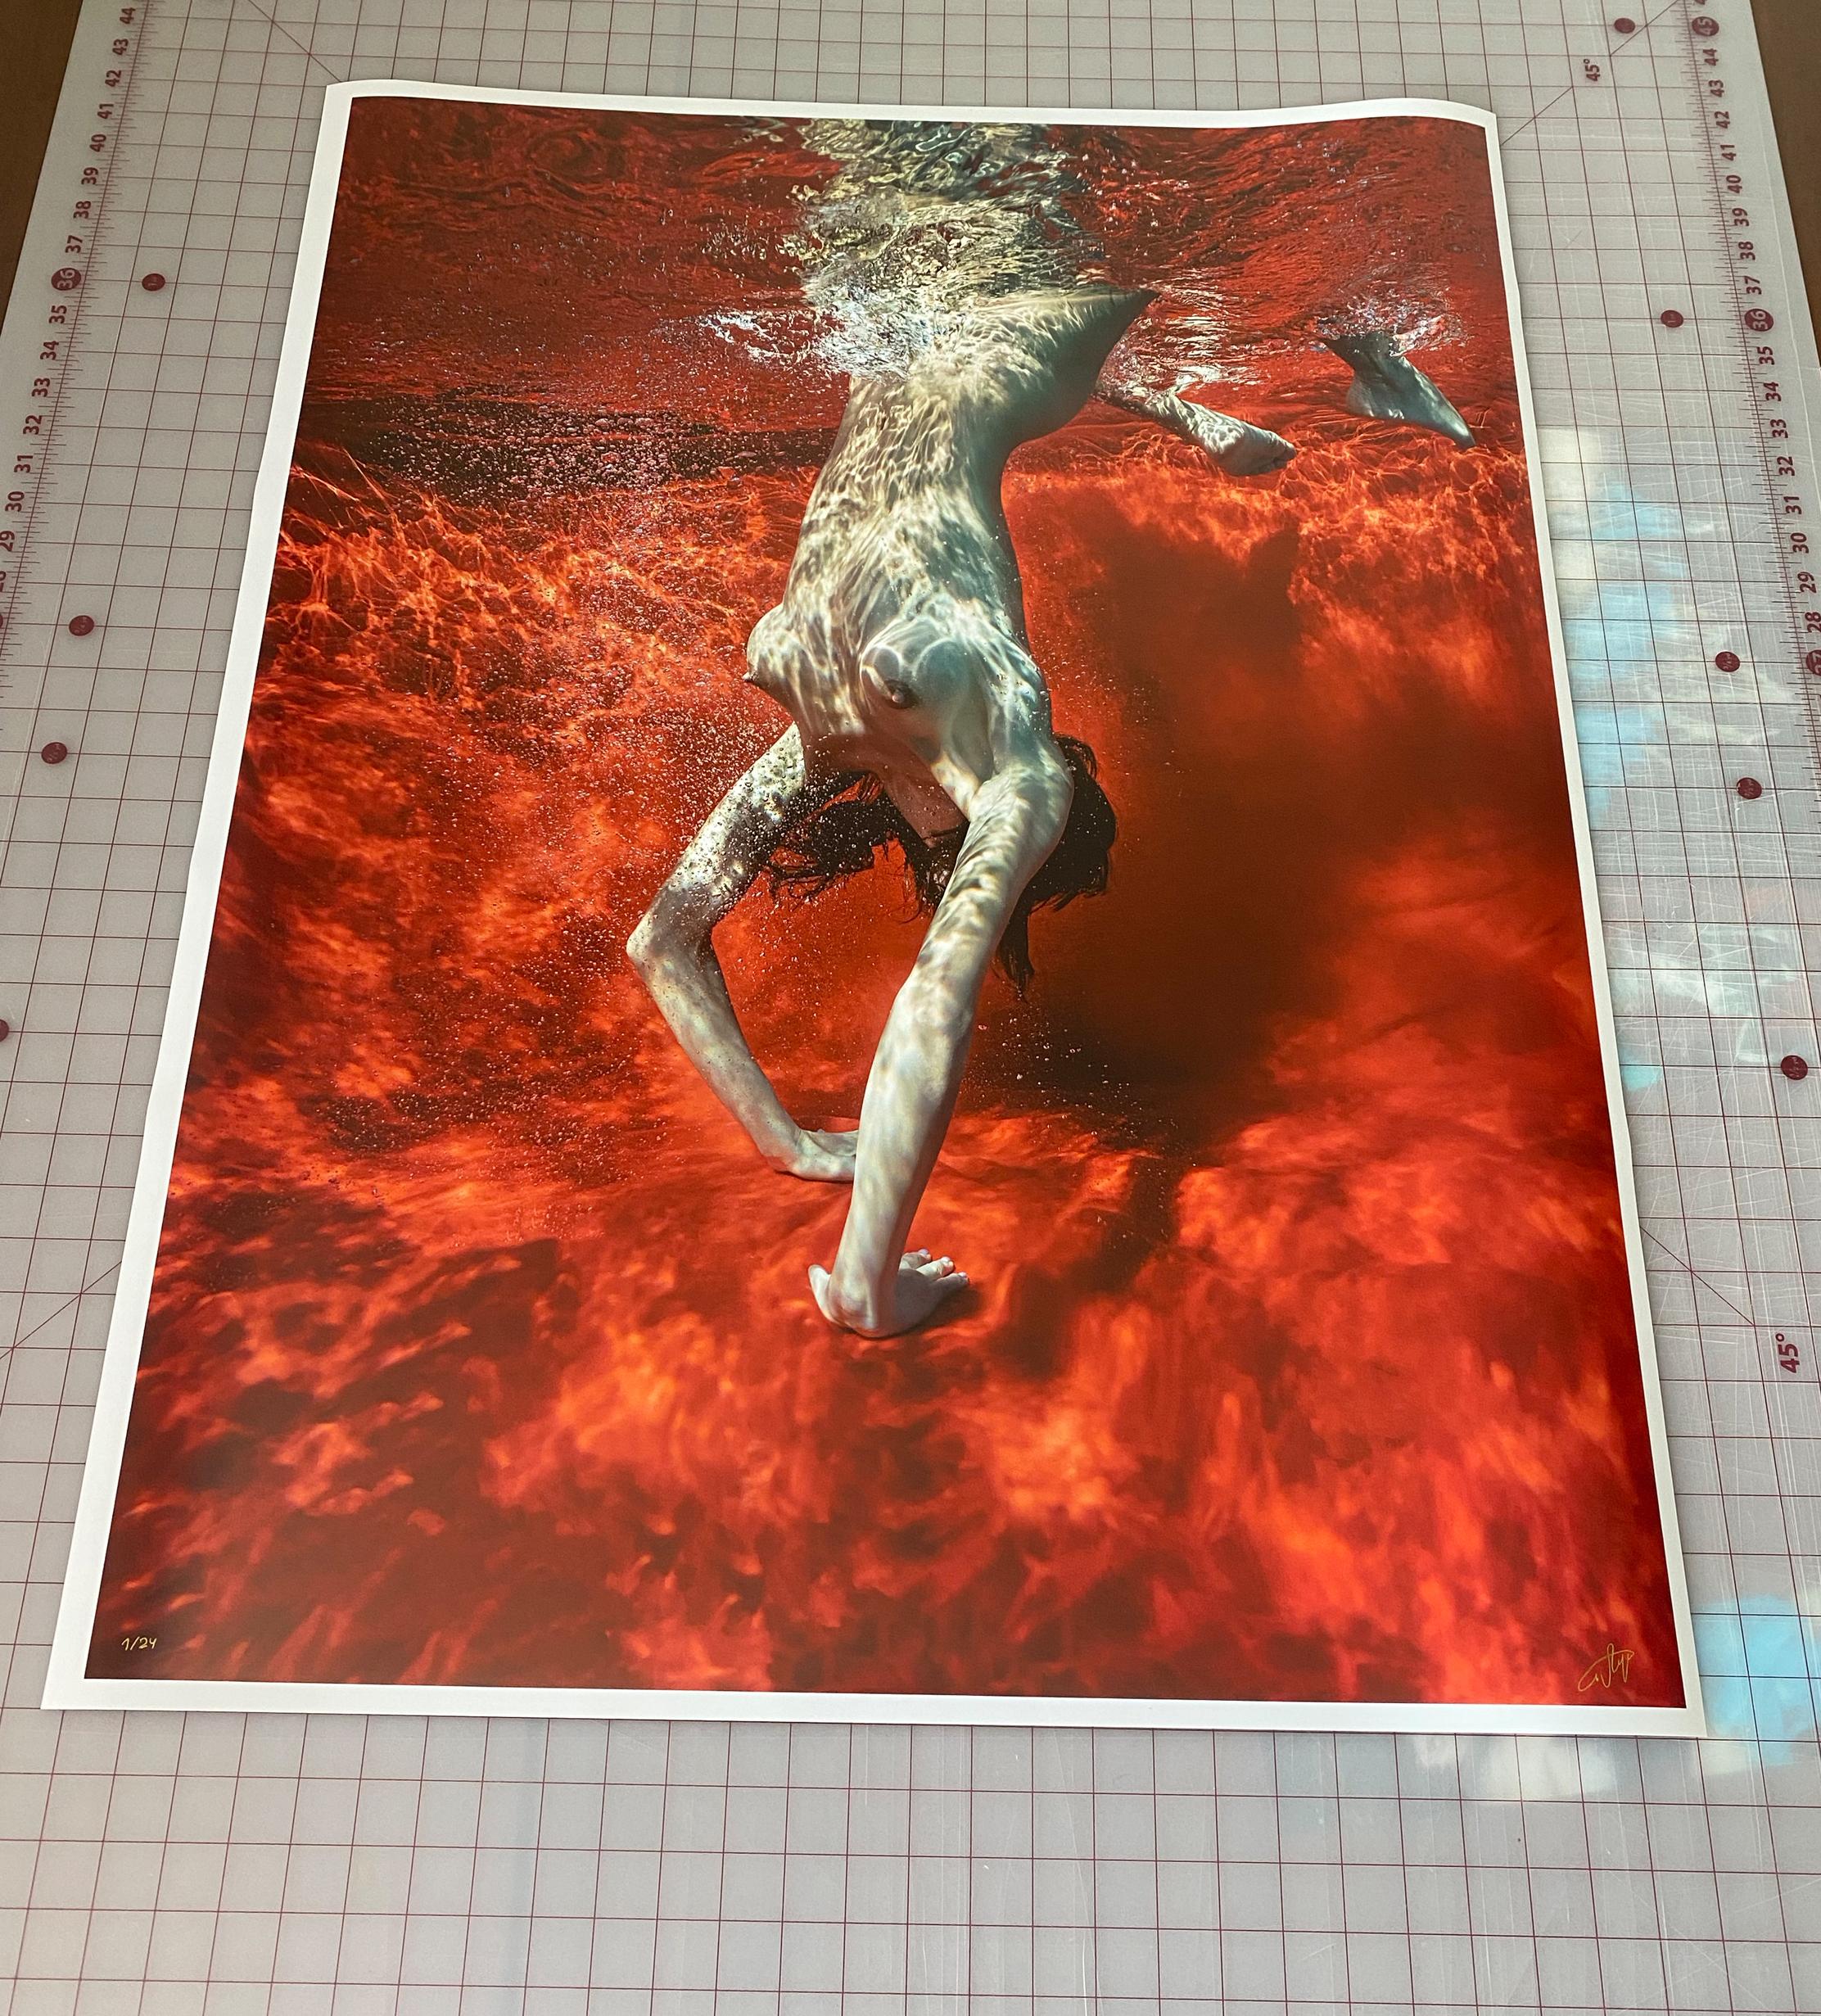 Blood and Milk VIII - underwater nude photograph - archival pigment print 46x35